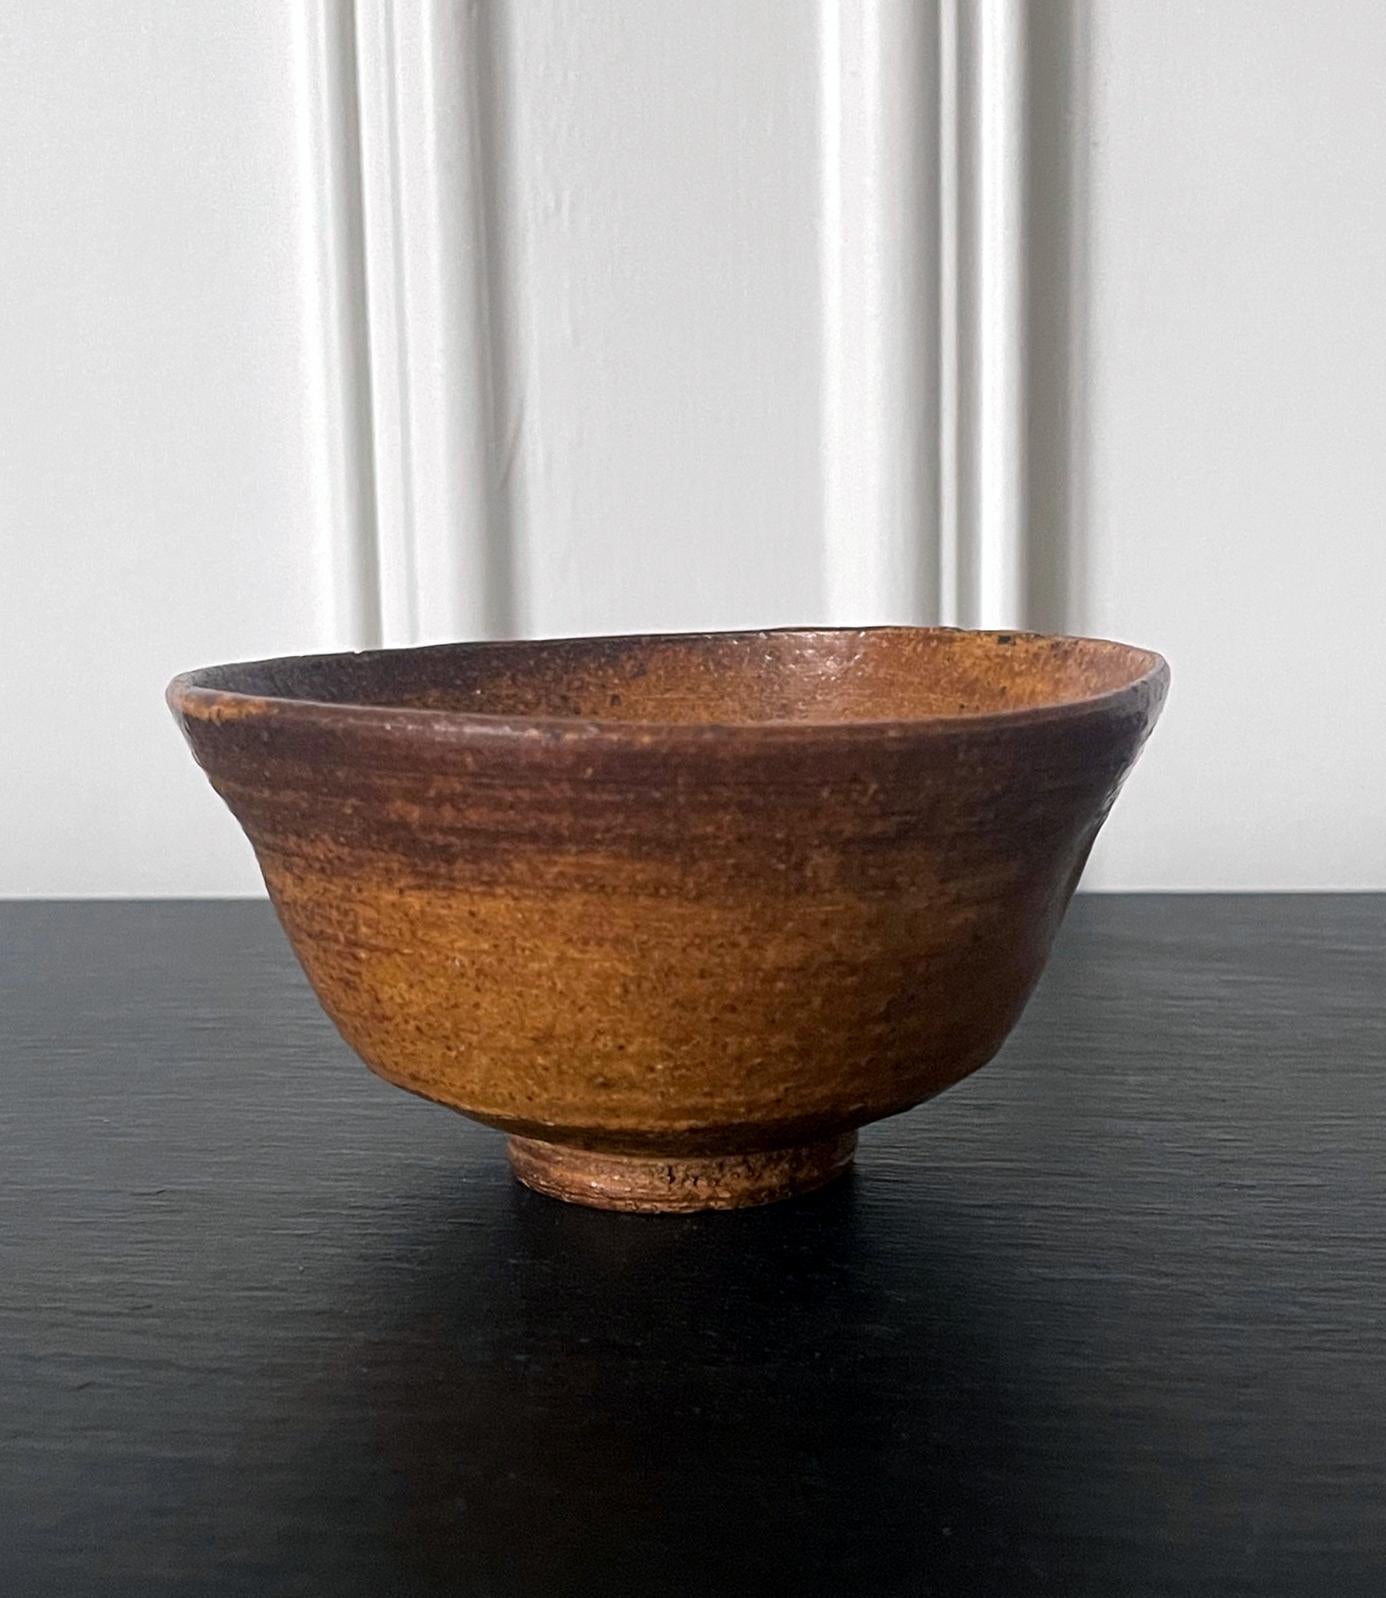 A ceramic chawan tea bowl made in Korea for Japanese market circa 17th century. The chawan is identified as Irabo type. Irabo bowls were essentially considered as a second generation or late period Korean export, made specifically to meet the demand